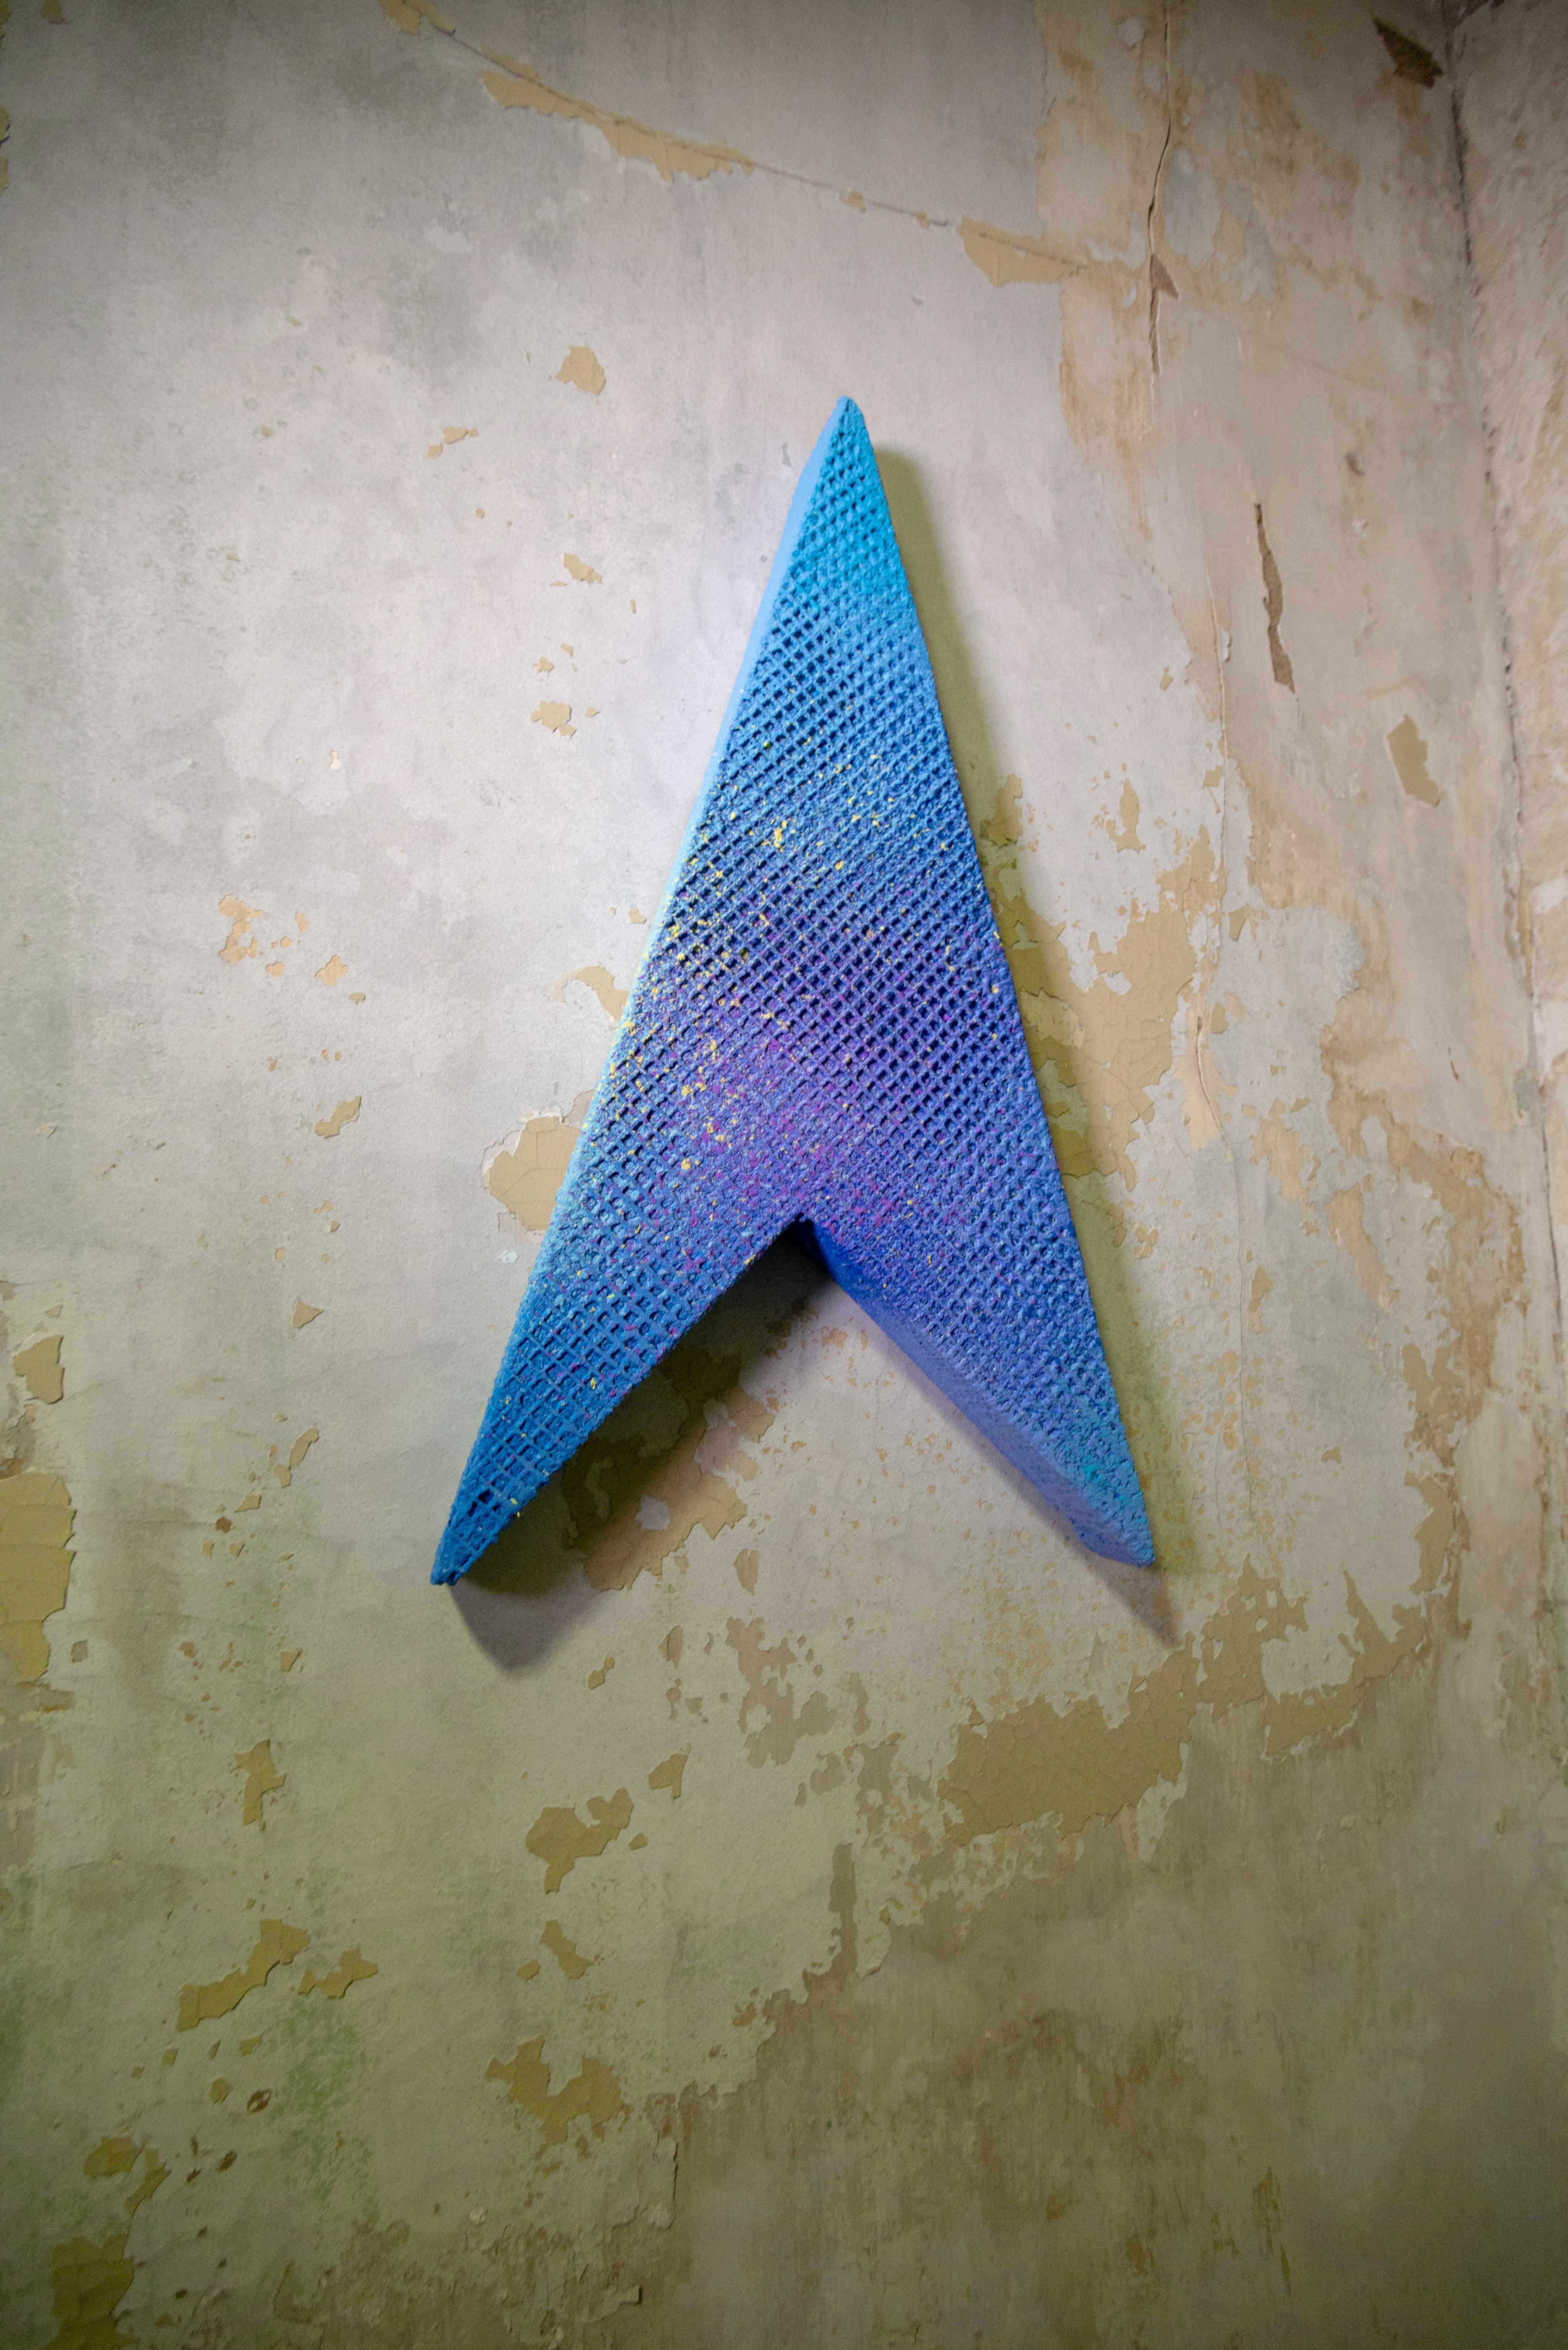 This piece is in a triangular arrow-looking shape in a blue tone, hence its name Blue Arrow. The piece is done in mixed media to create different tones and textures. The piece overall has a grid-like texture to it with a heavy blue tone and a purple